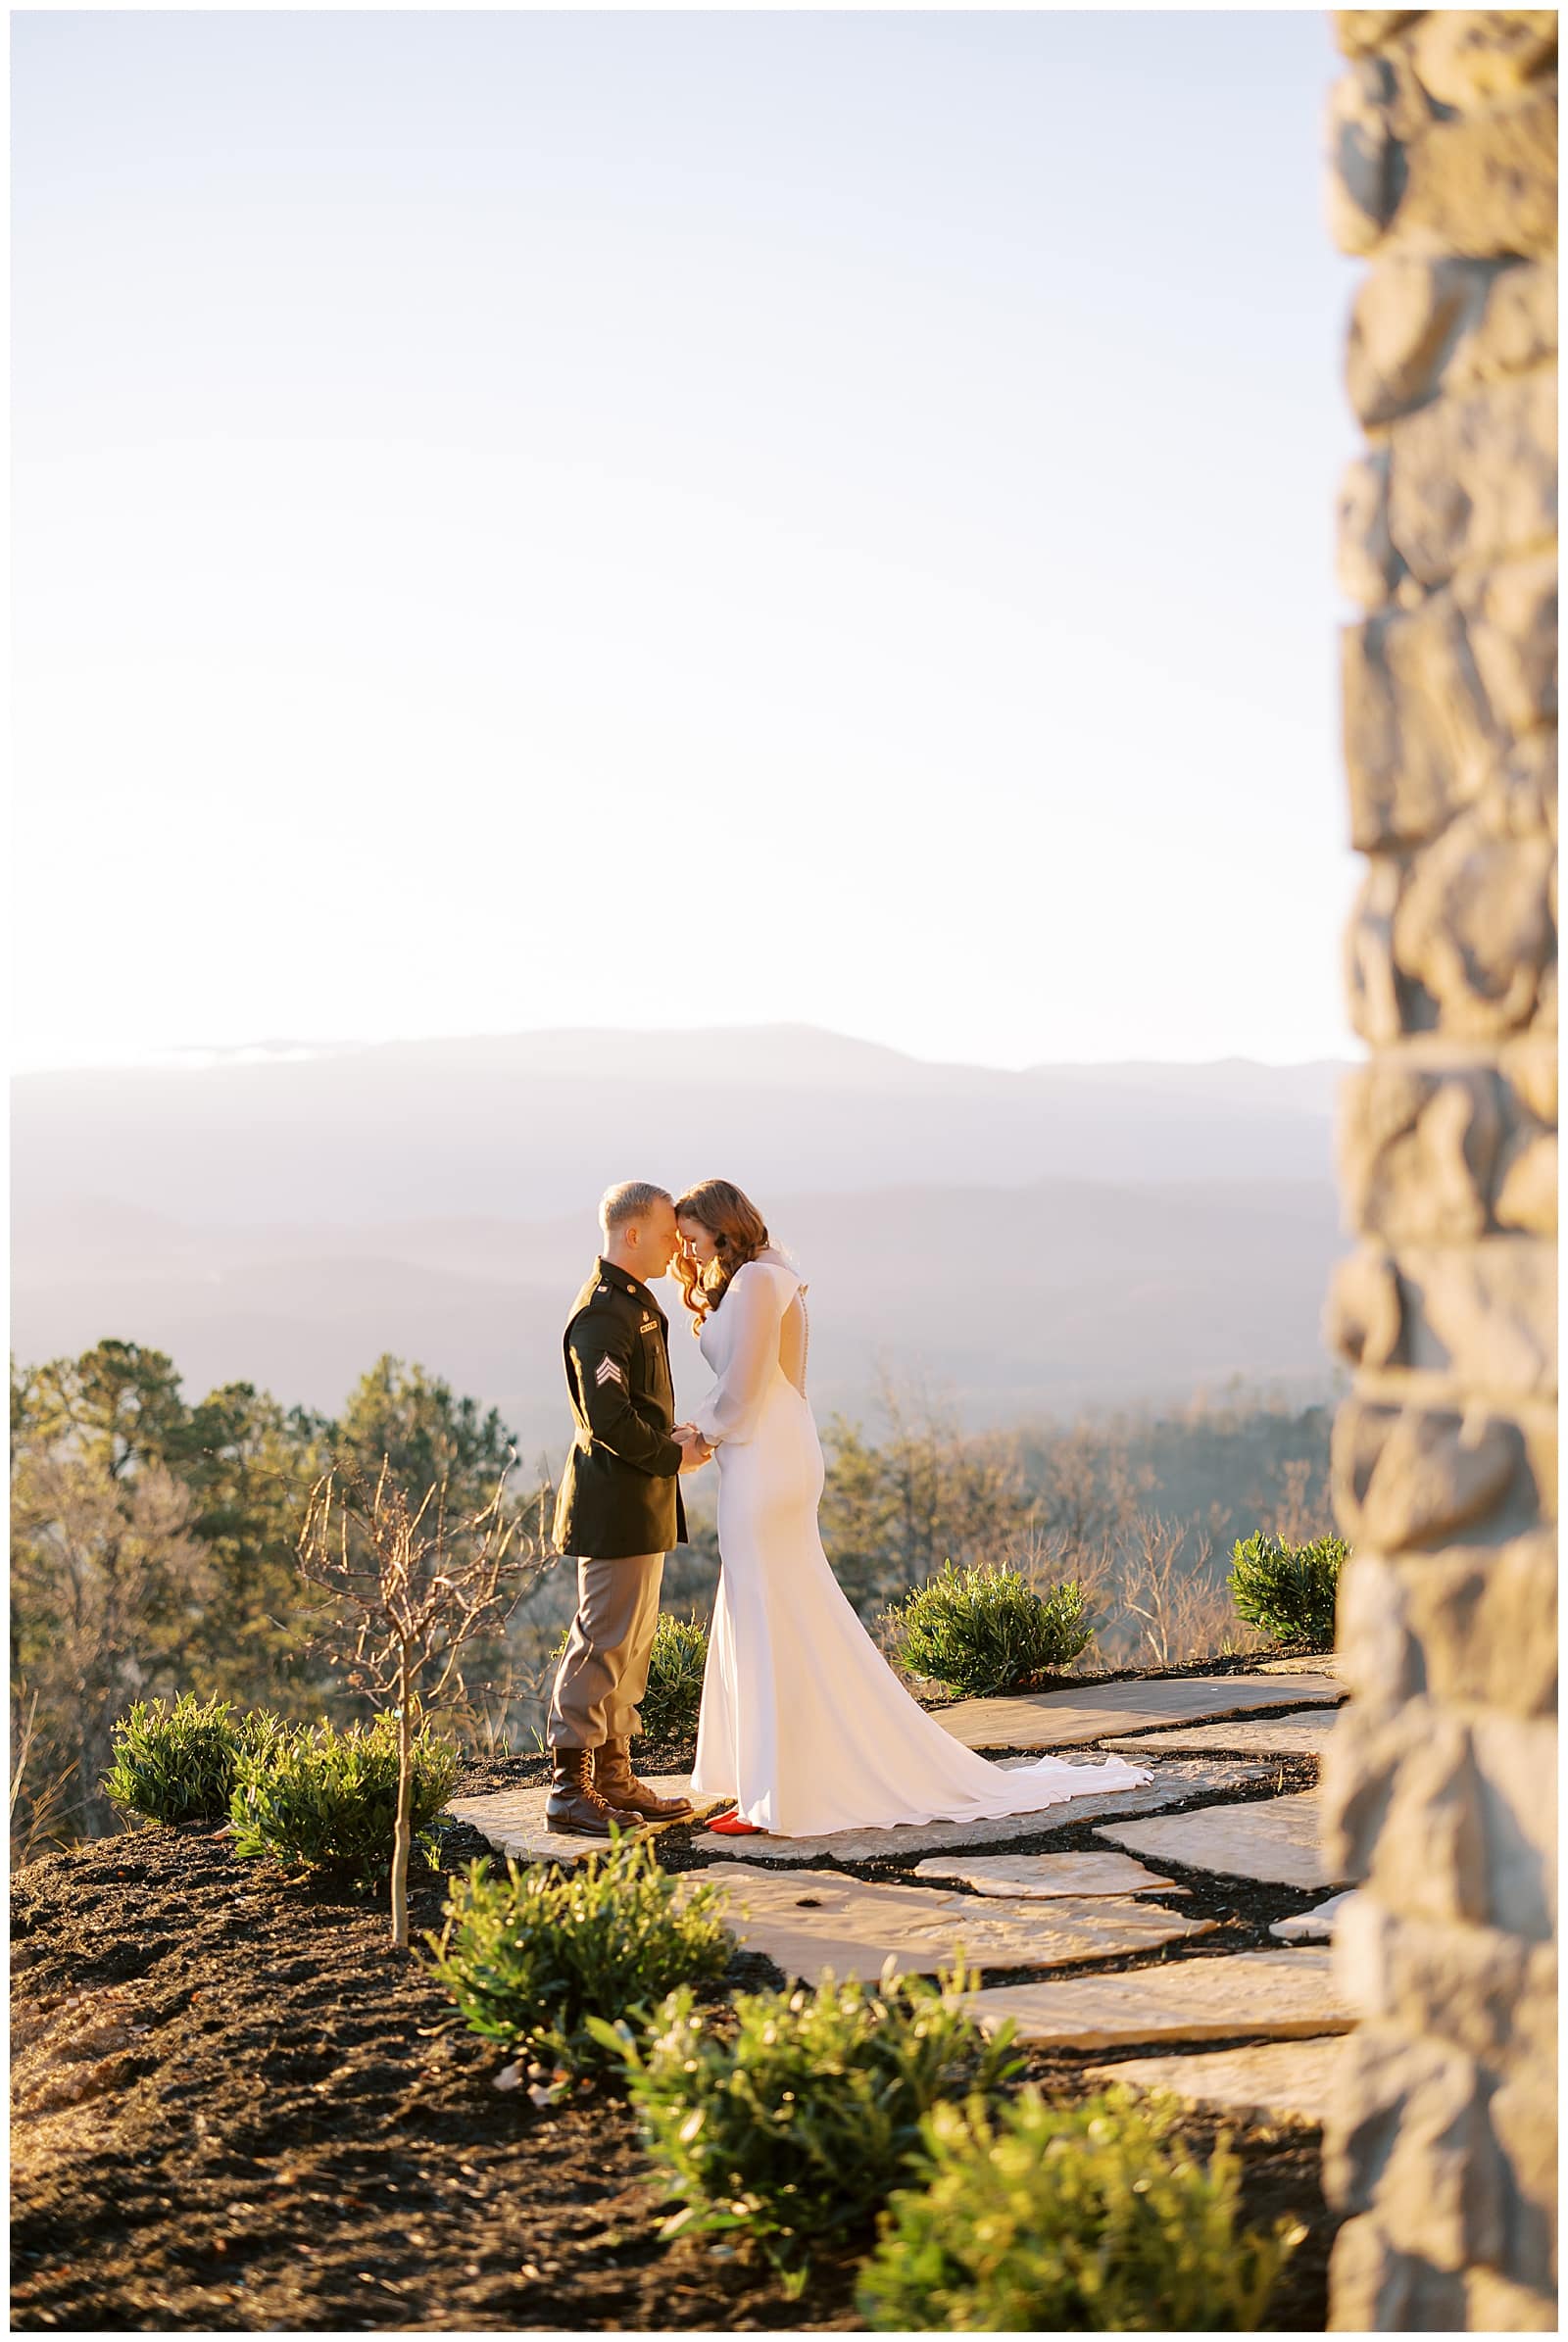 Bride and Groom outside during sunrise with the Smoky Mountains in the background